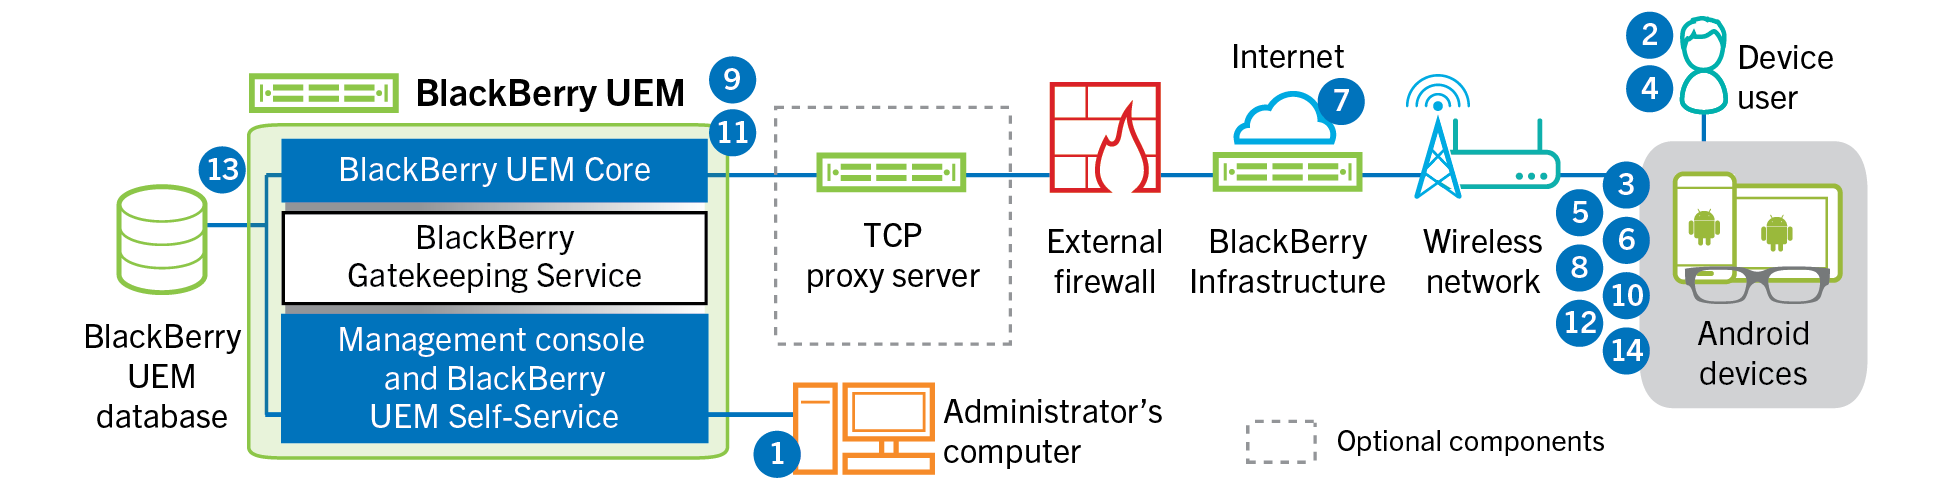 Diagram showing the steps and components mentioned in the following data flow.